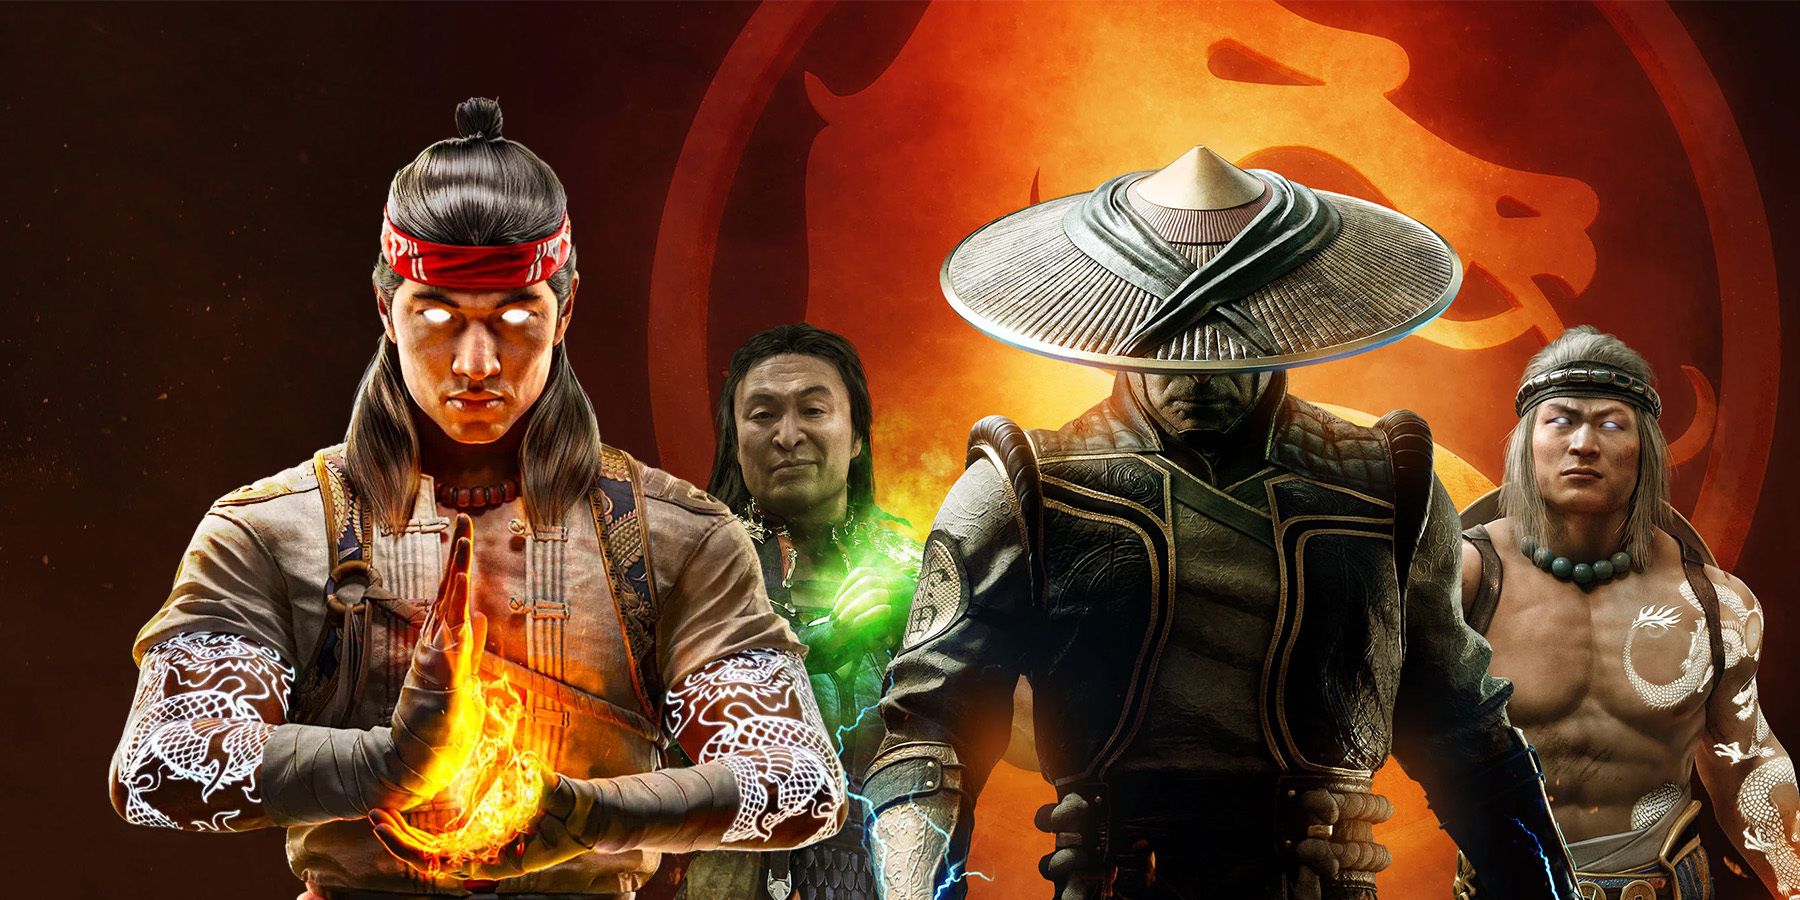 Mortal Kombat 12 Exclusive: NO MK12 On PS4/XBOX,WB WANTS IT ON PS5.XBOX  SERIES X + MORE! 